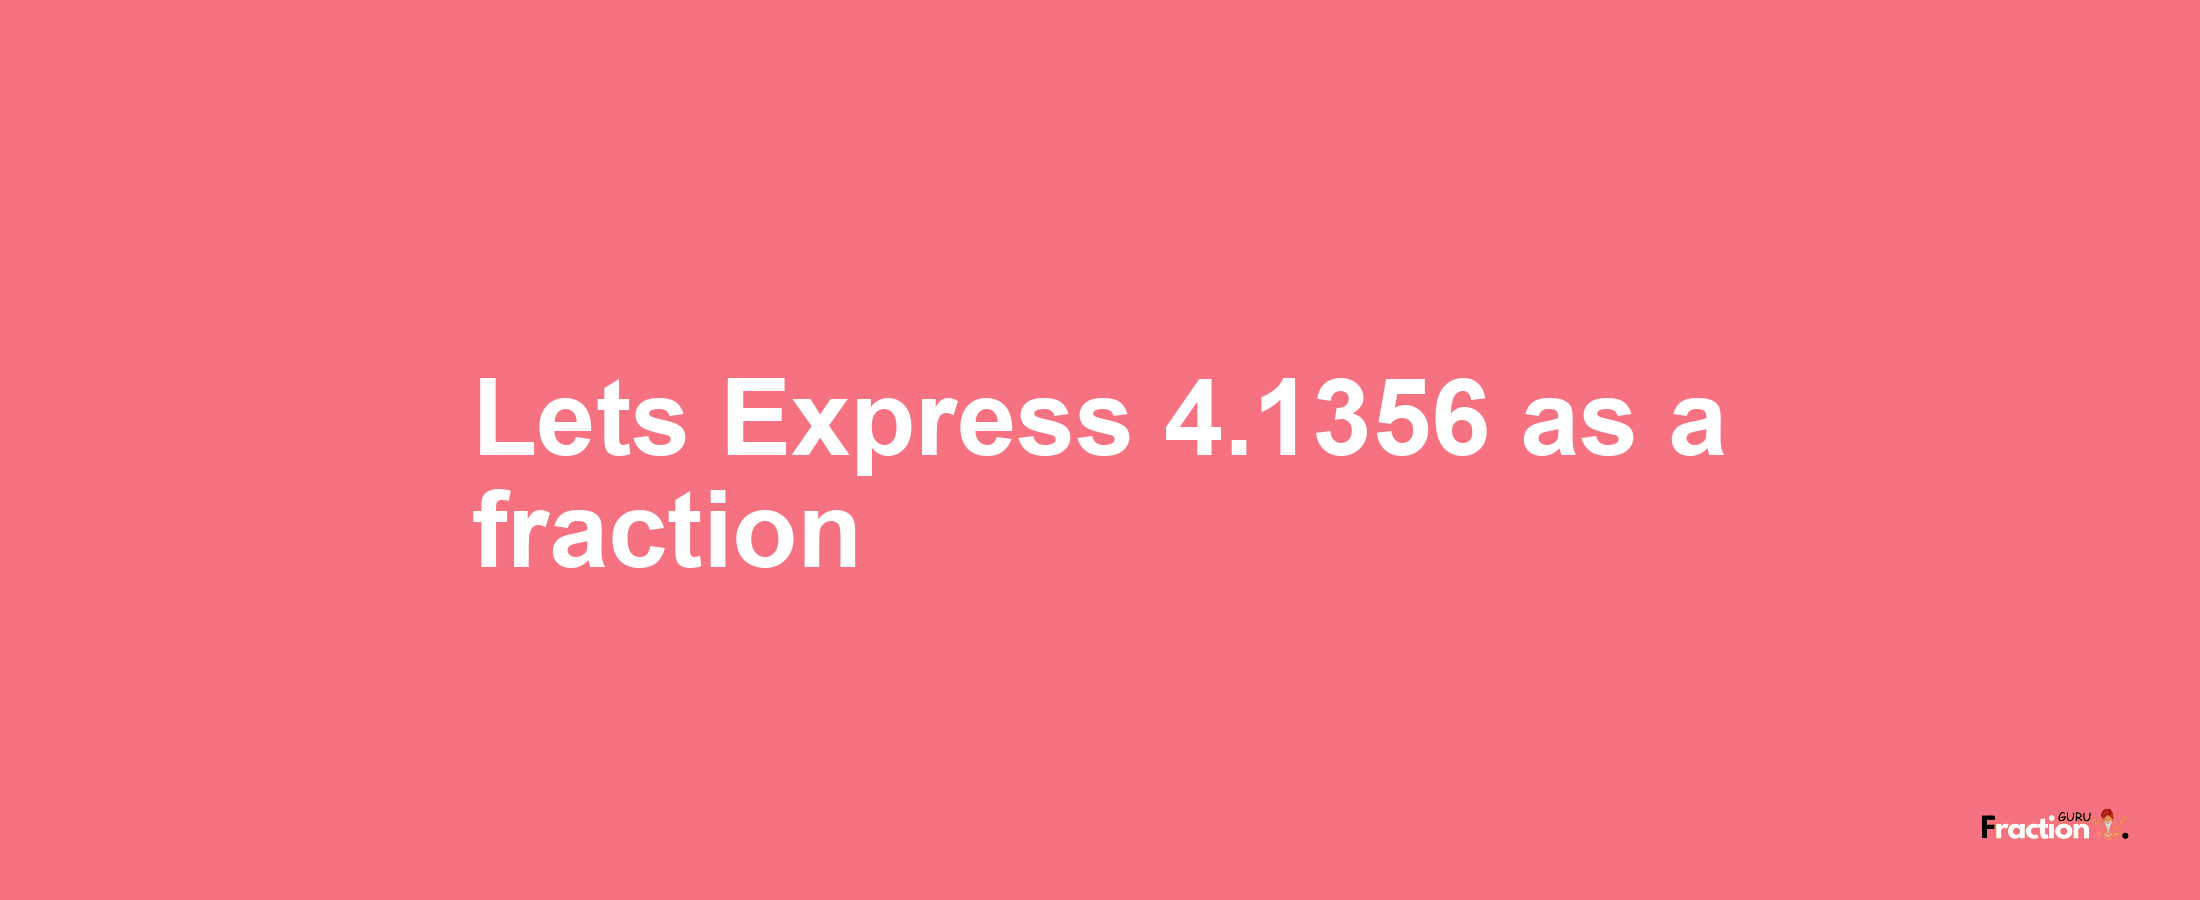 Lets Express 4.1356 as afraction